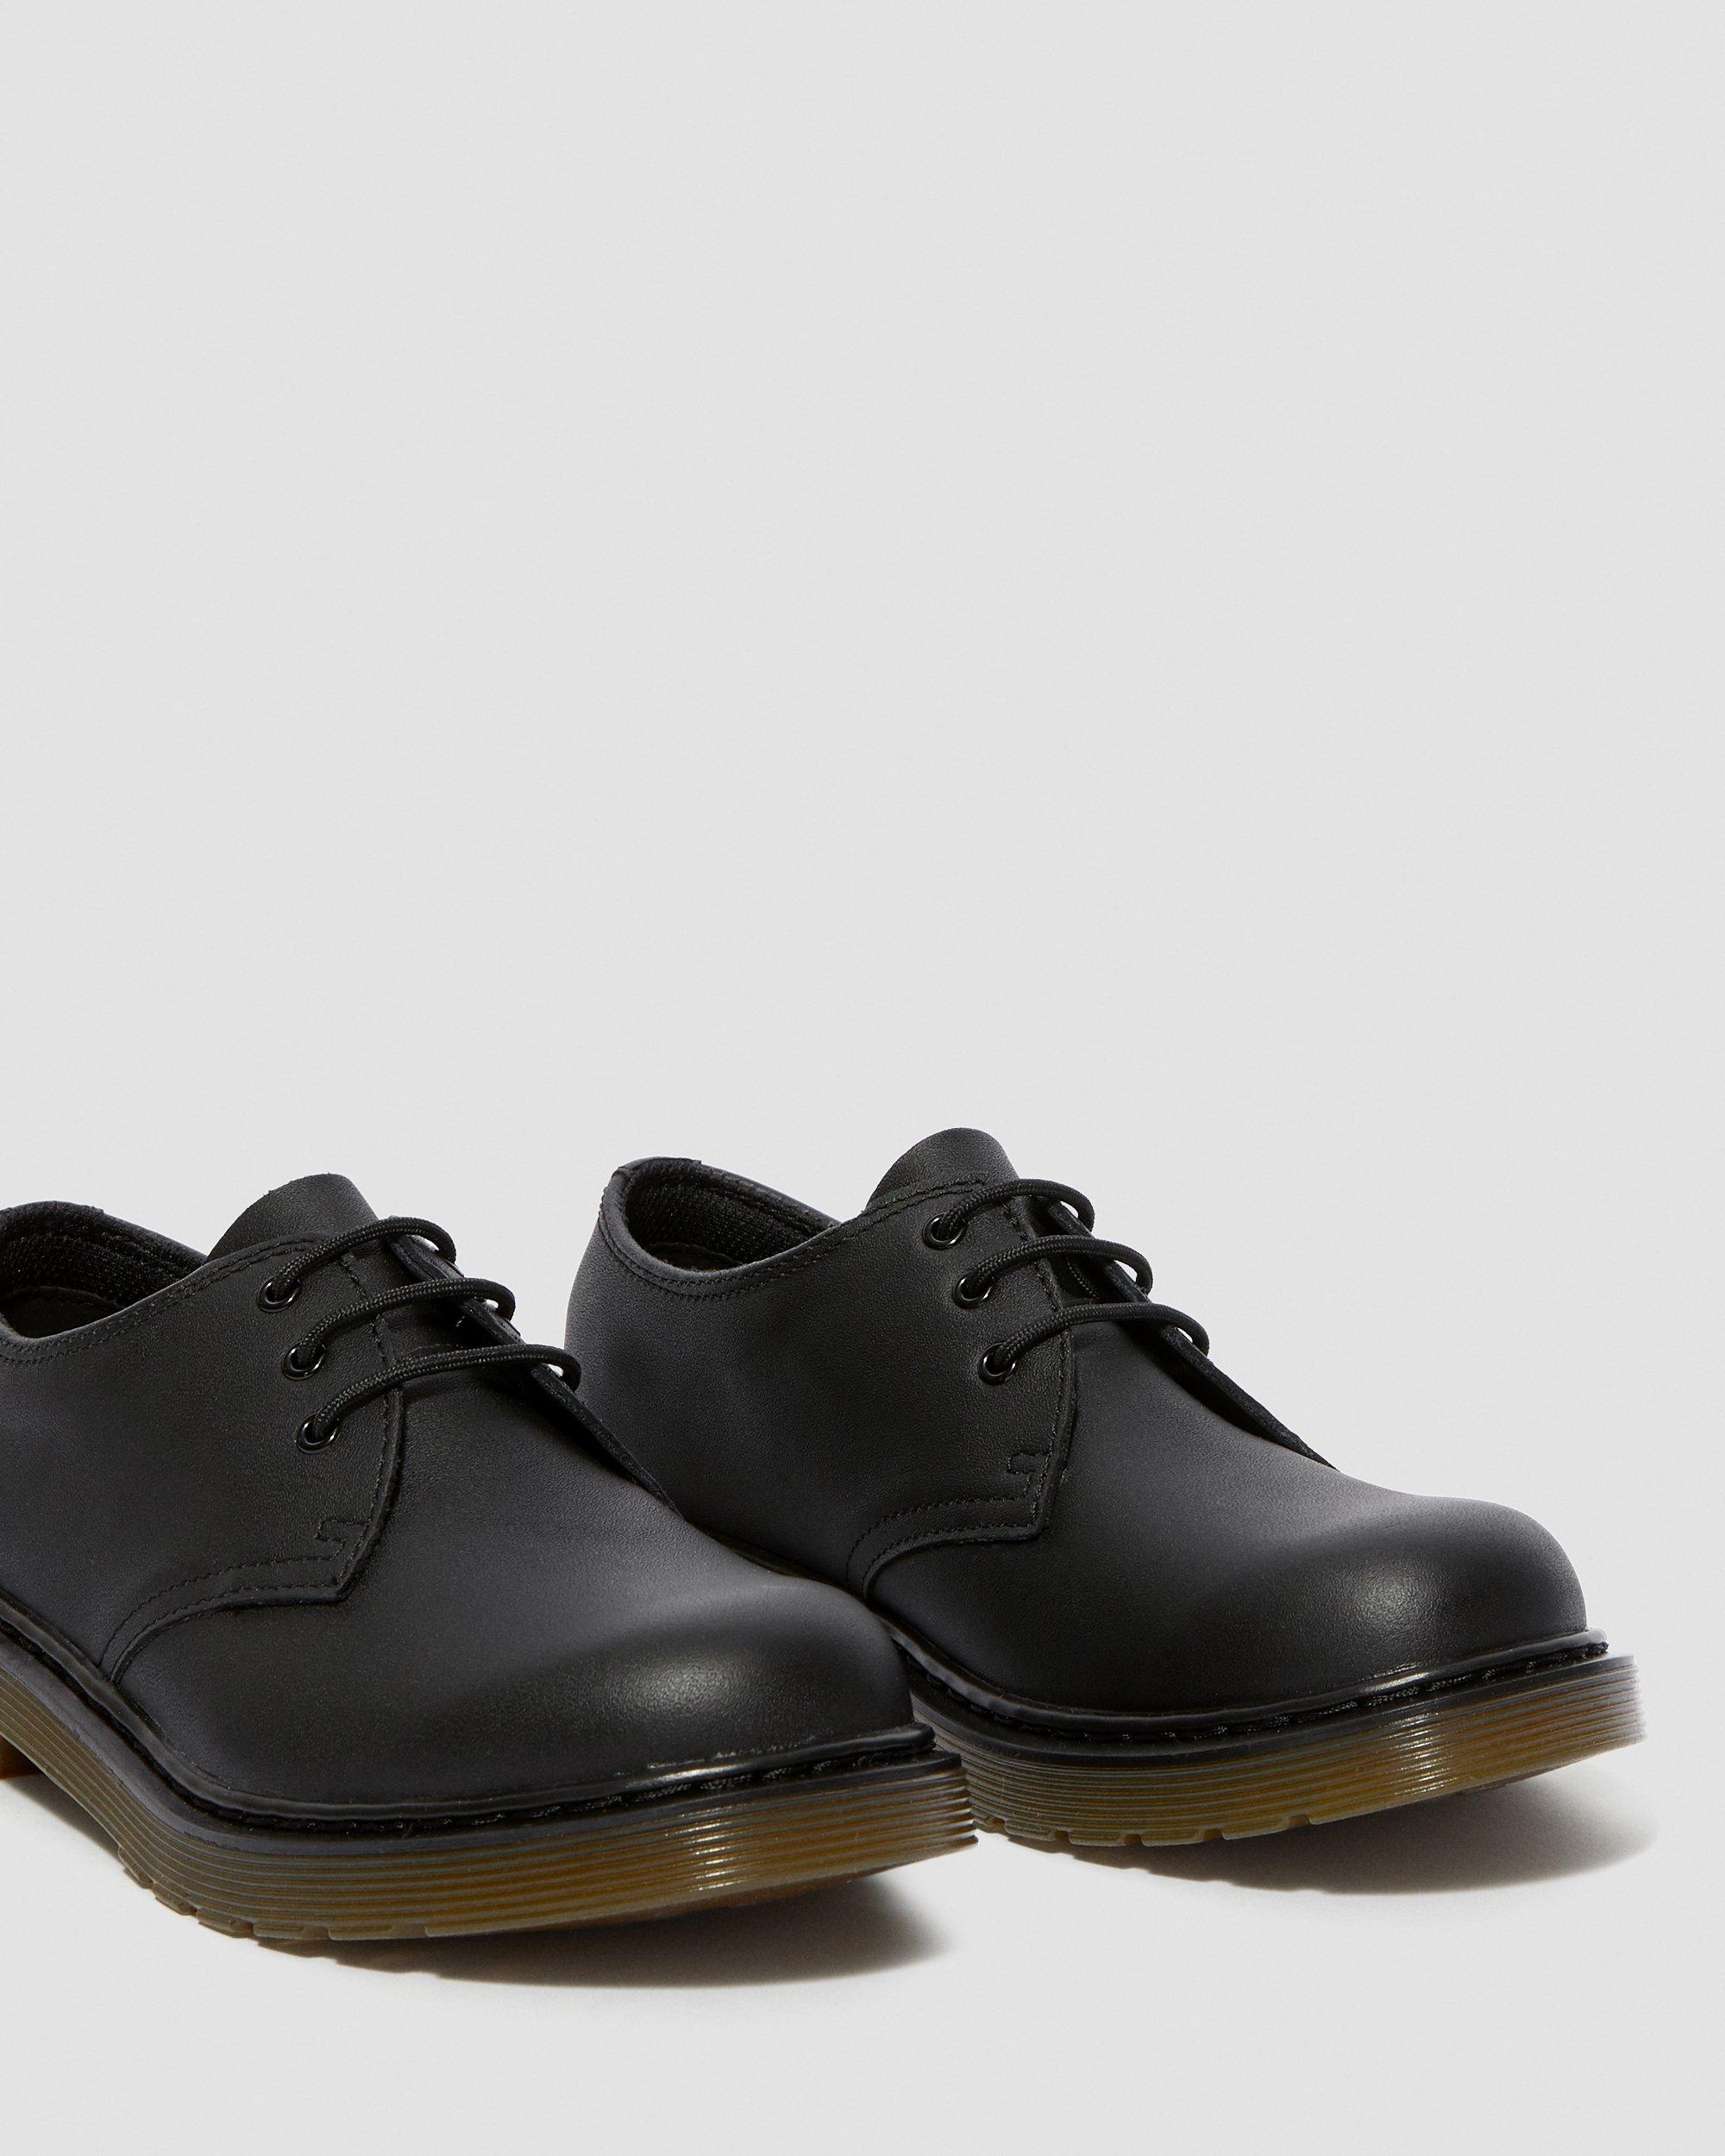 Youth 1461 Leather Oxford Shoes | Dr. Martens